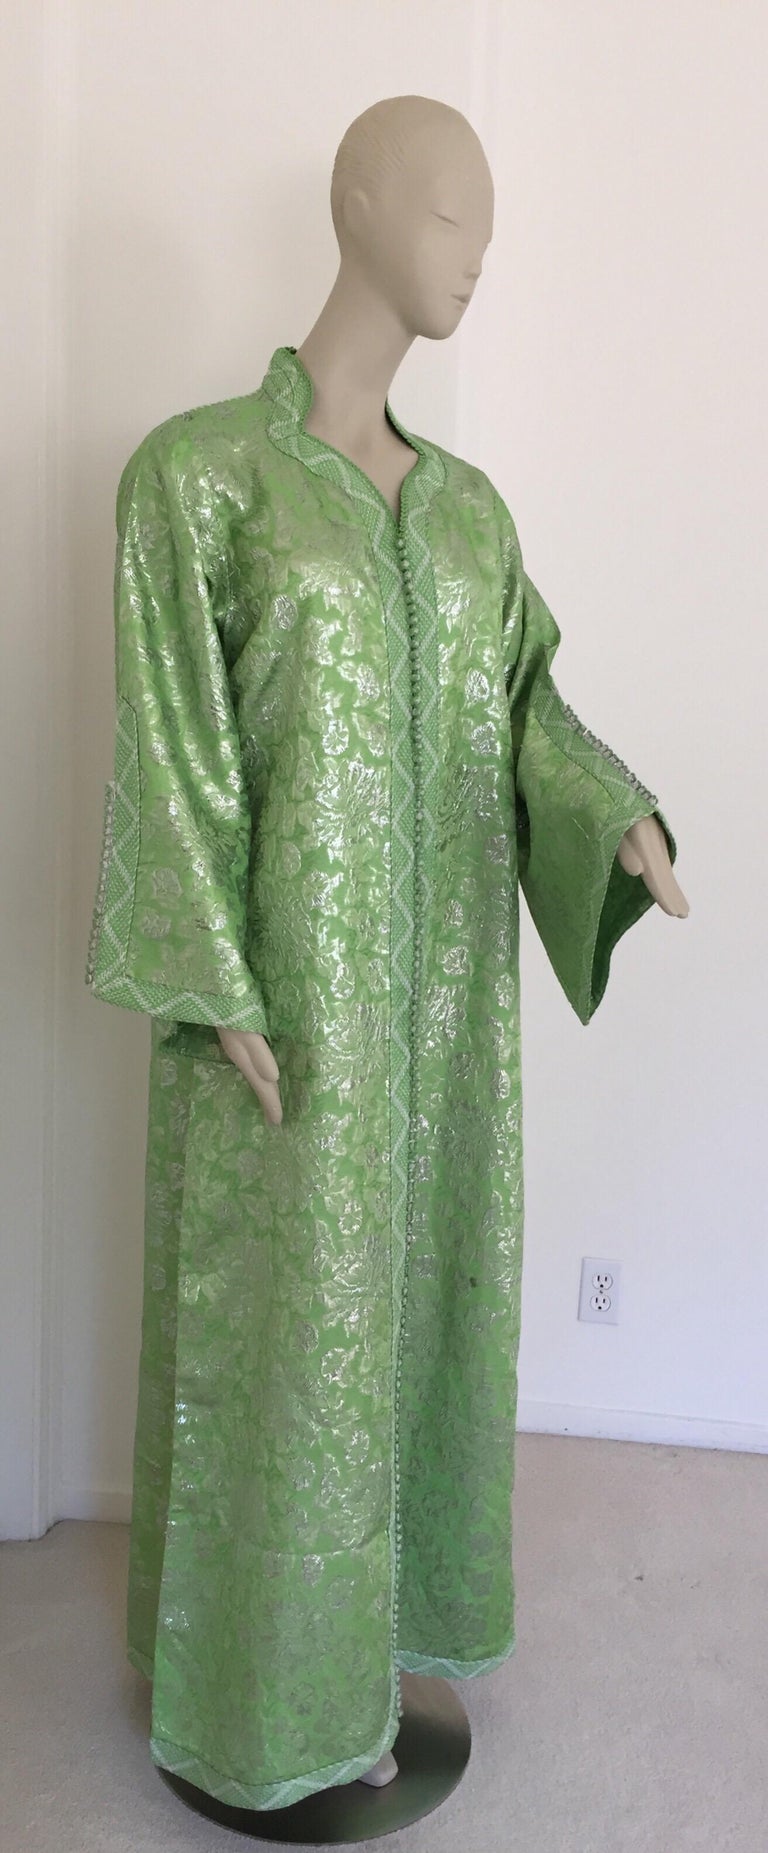 Embroidered Elegant Moroccan Caftan Lime Green and Silver Metallic Floral Brocade For Sale